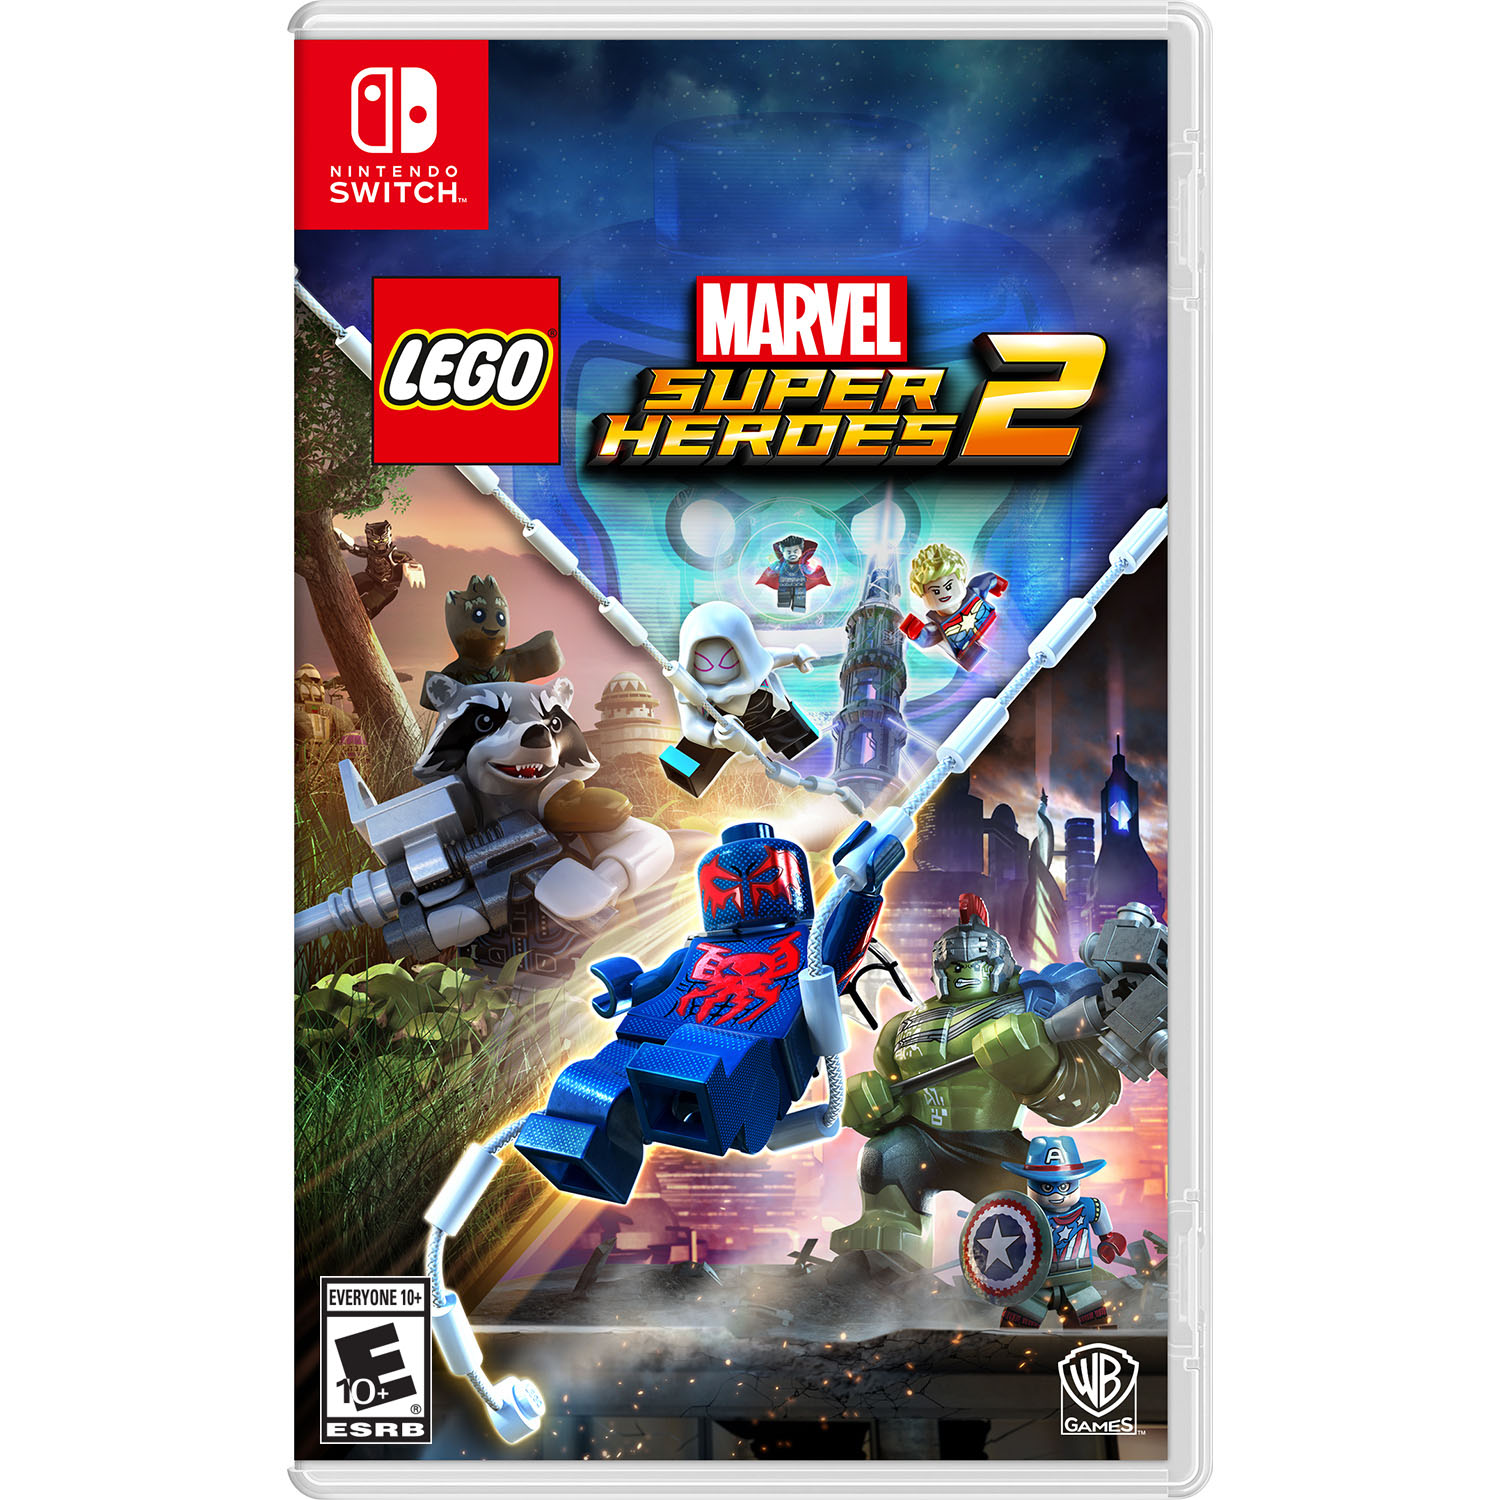 LEGO Marvel Super Heroes 2 - Nintendo Switch New Everyone 10+ Video Games - image 1 of 2